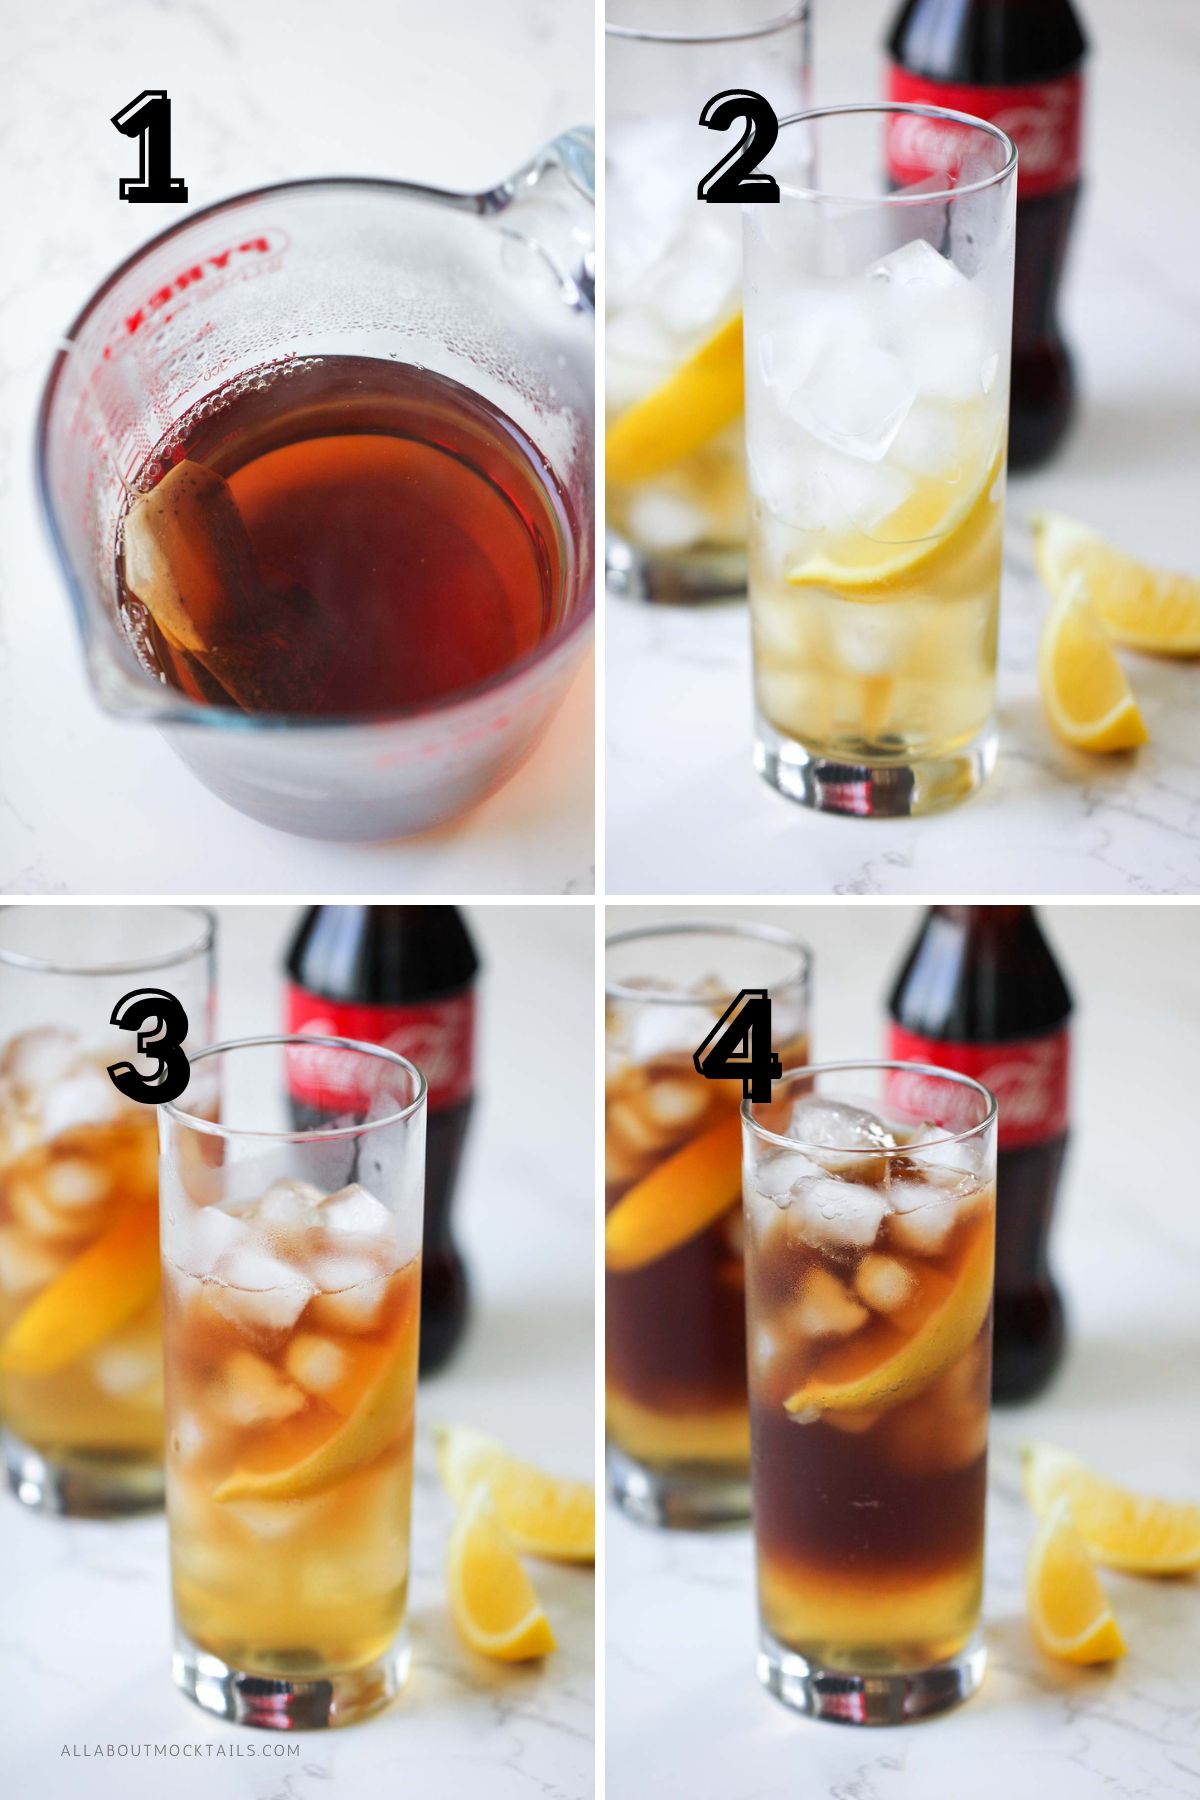 How to Make Non-alcoholic Long Island Iced Tea Step 1 to 4